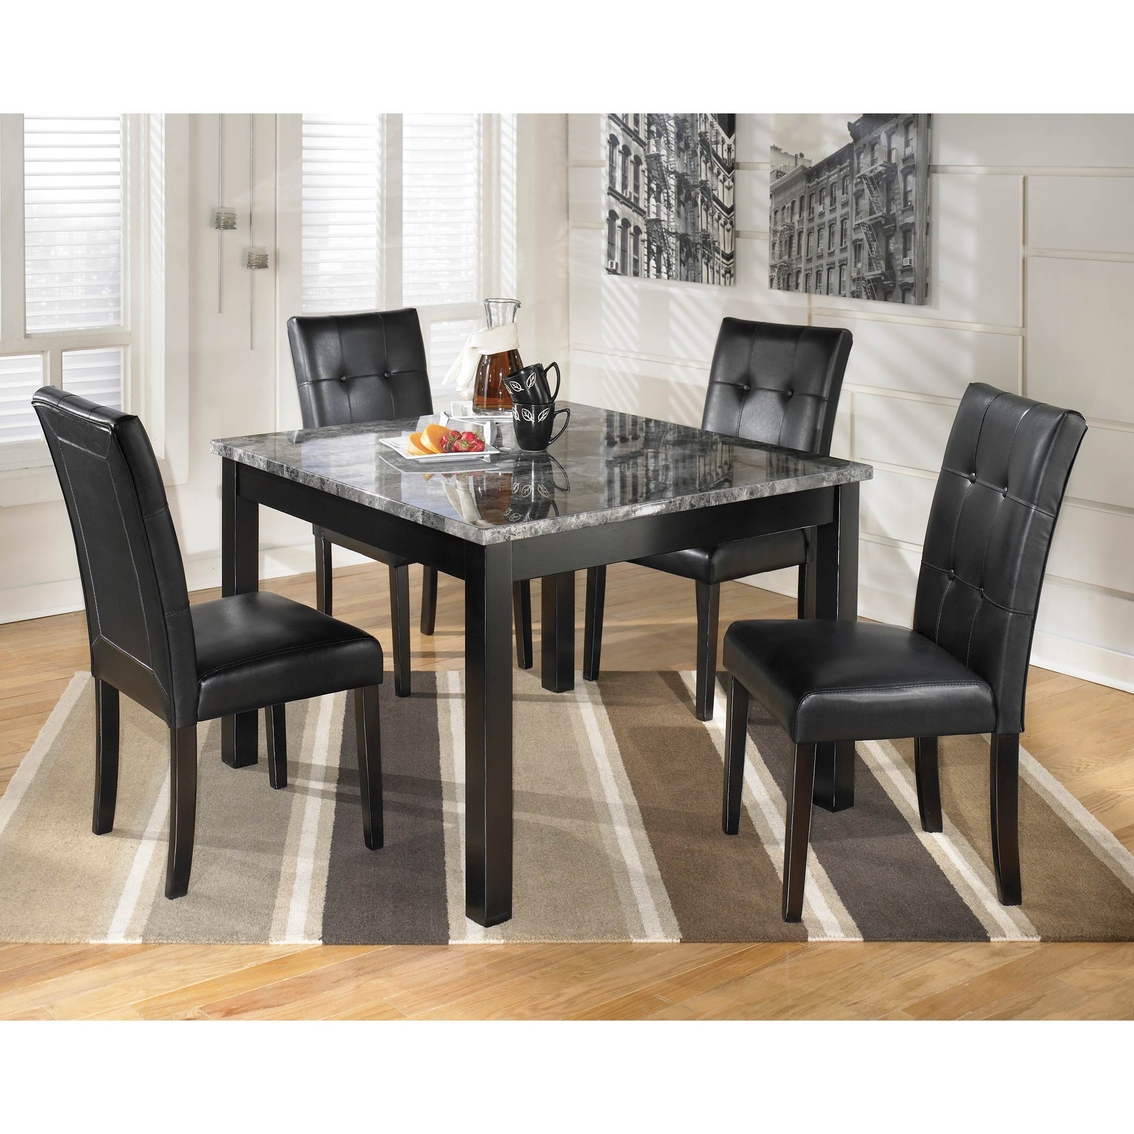 Signature Design by Ashley Maysville 5 Pc. Square Counter Height Dining Set - Image 2 of 2